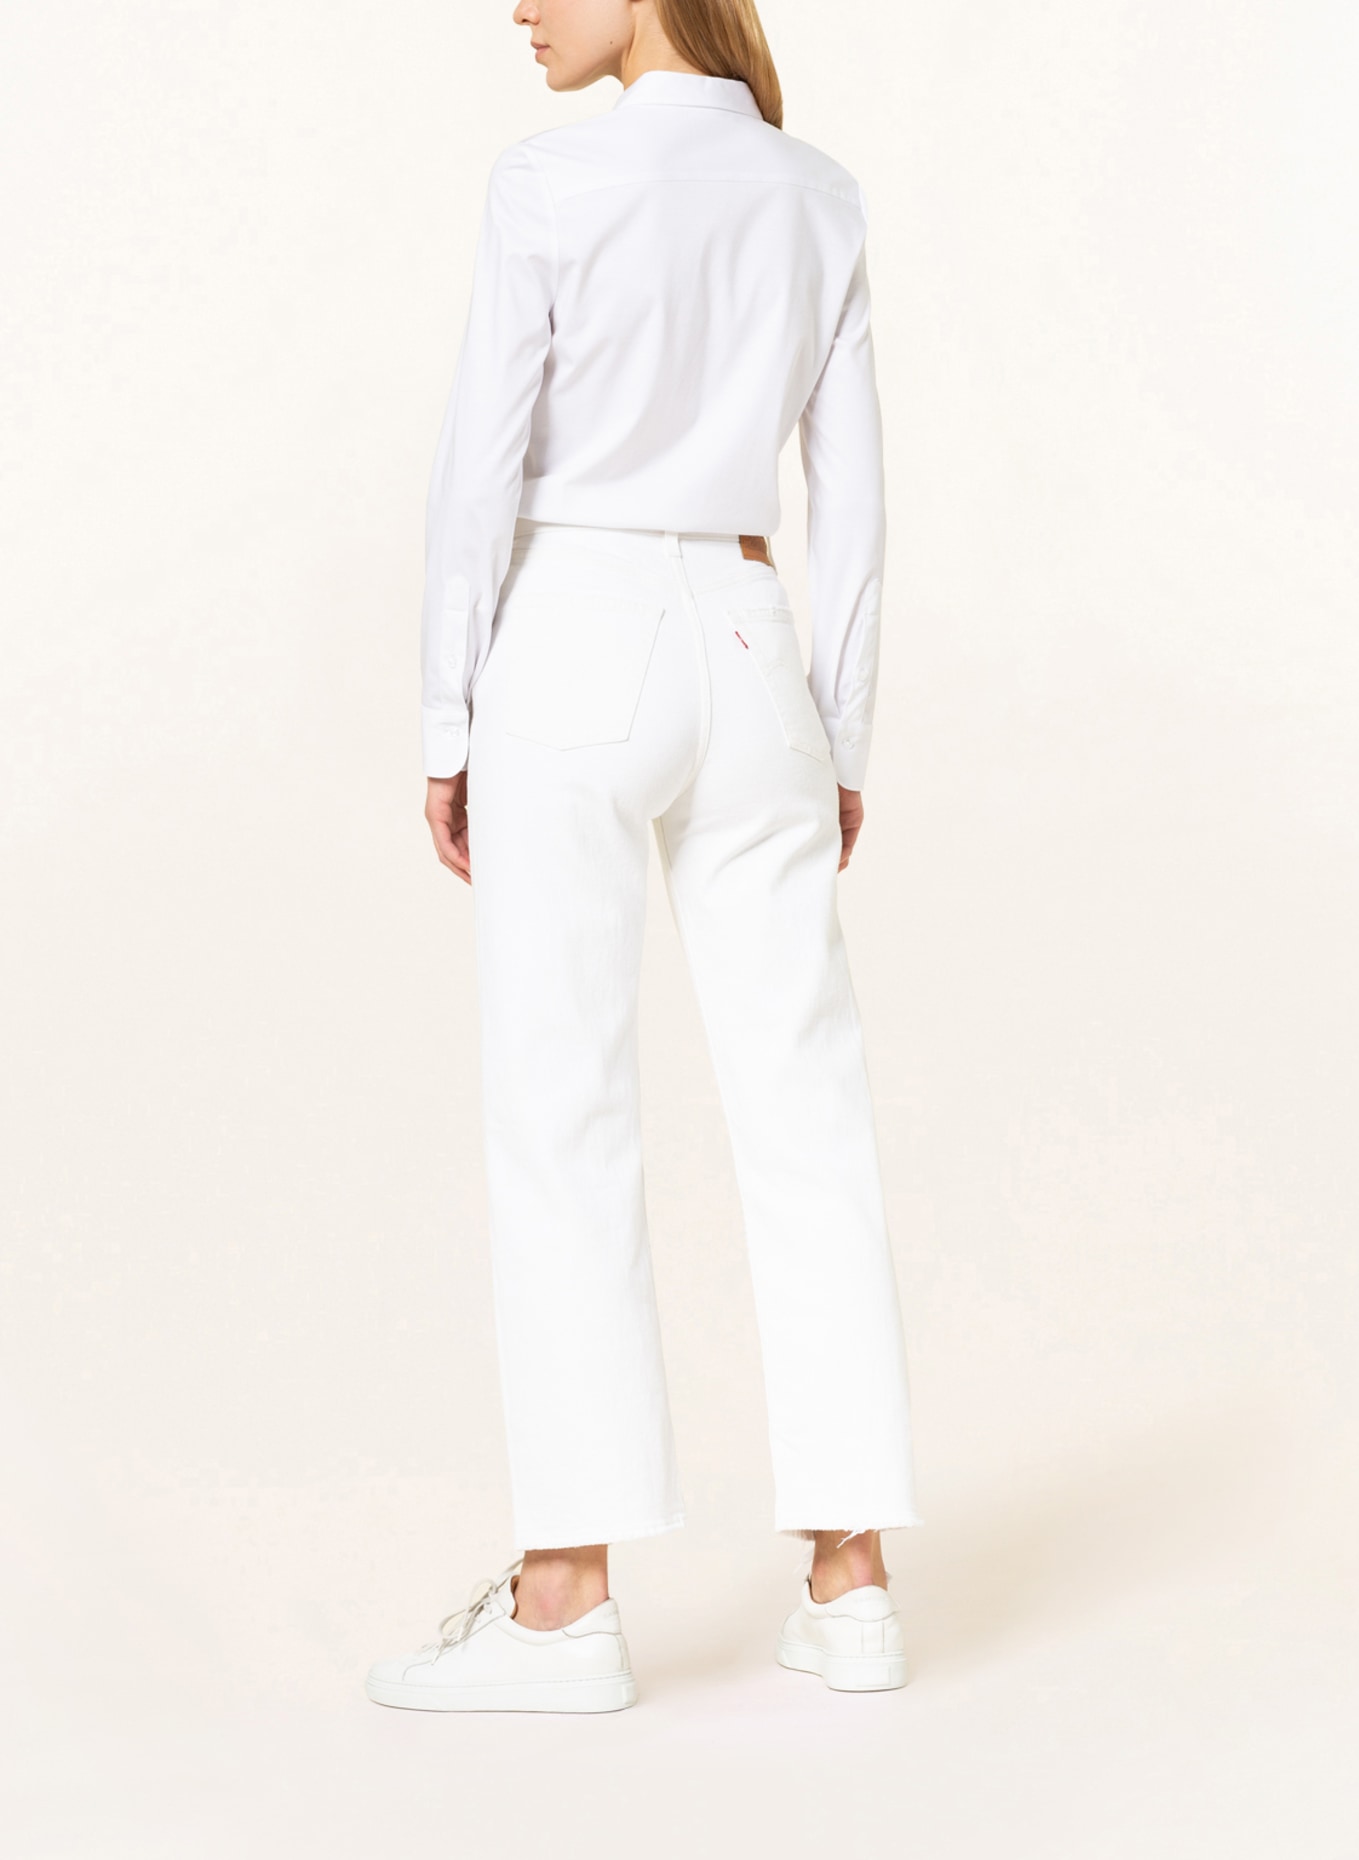 ETERNA Shirt blouse made of jersey, Color: WHITE (Image 3)